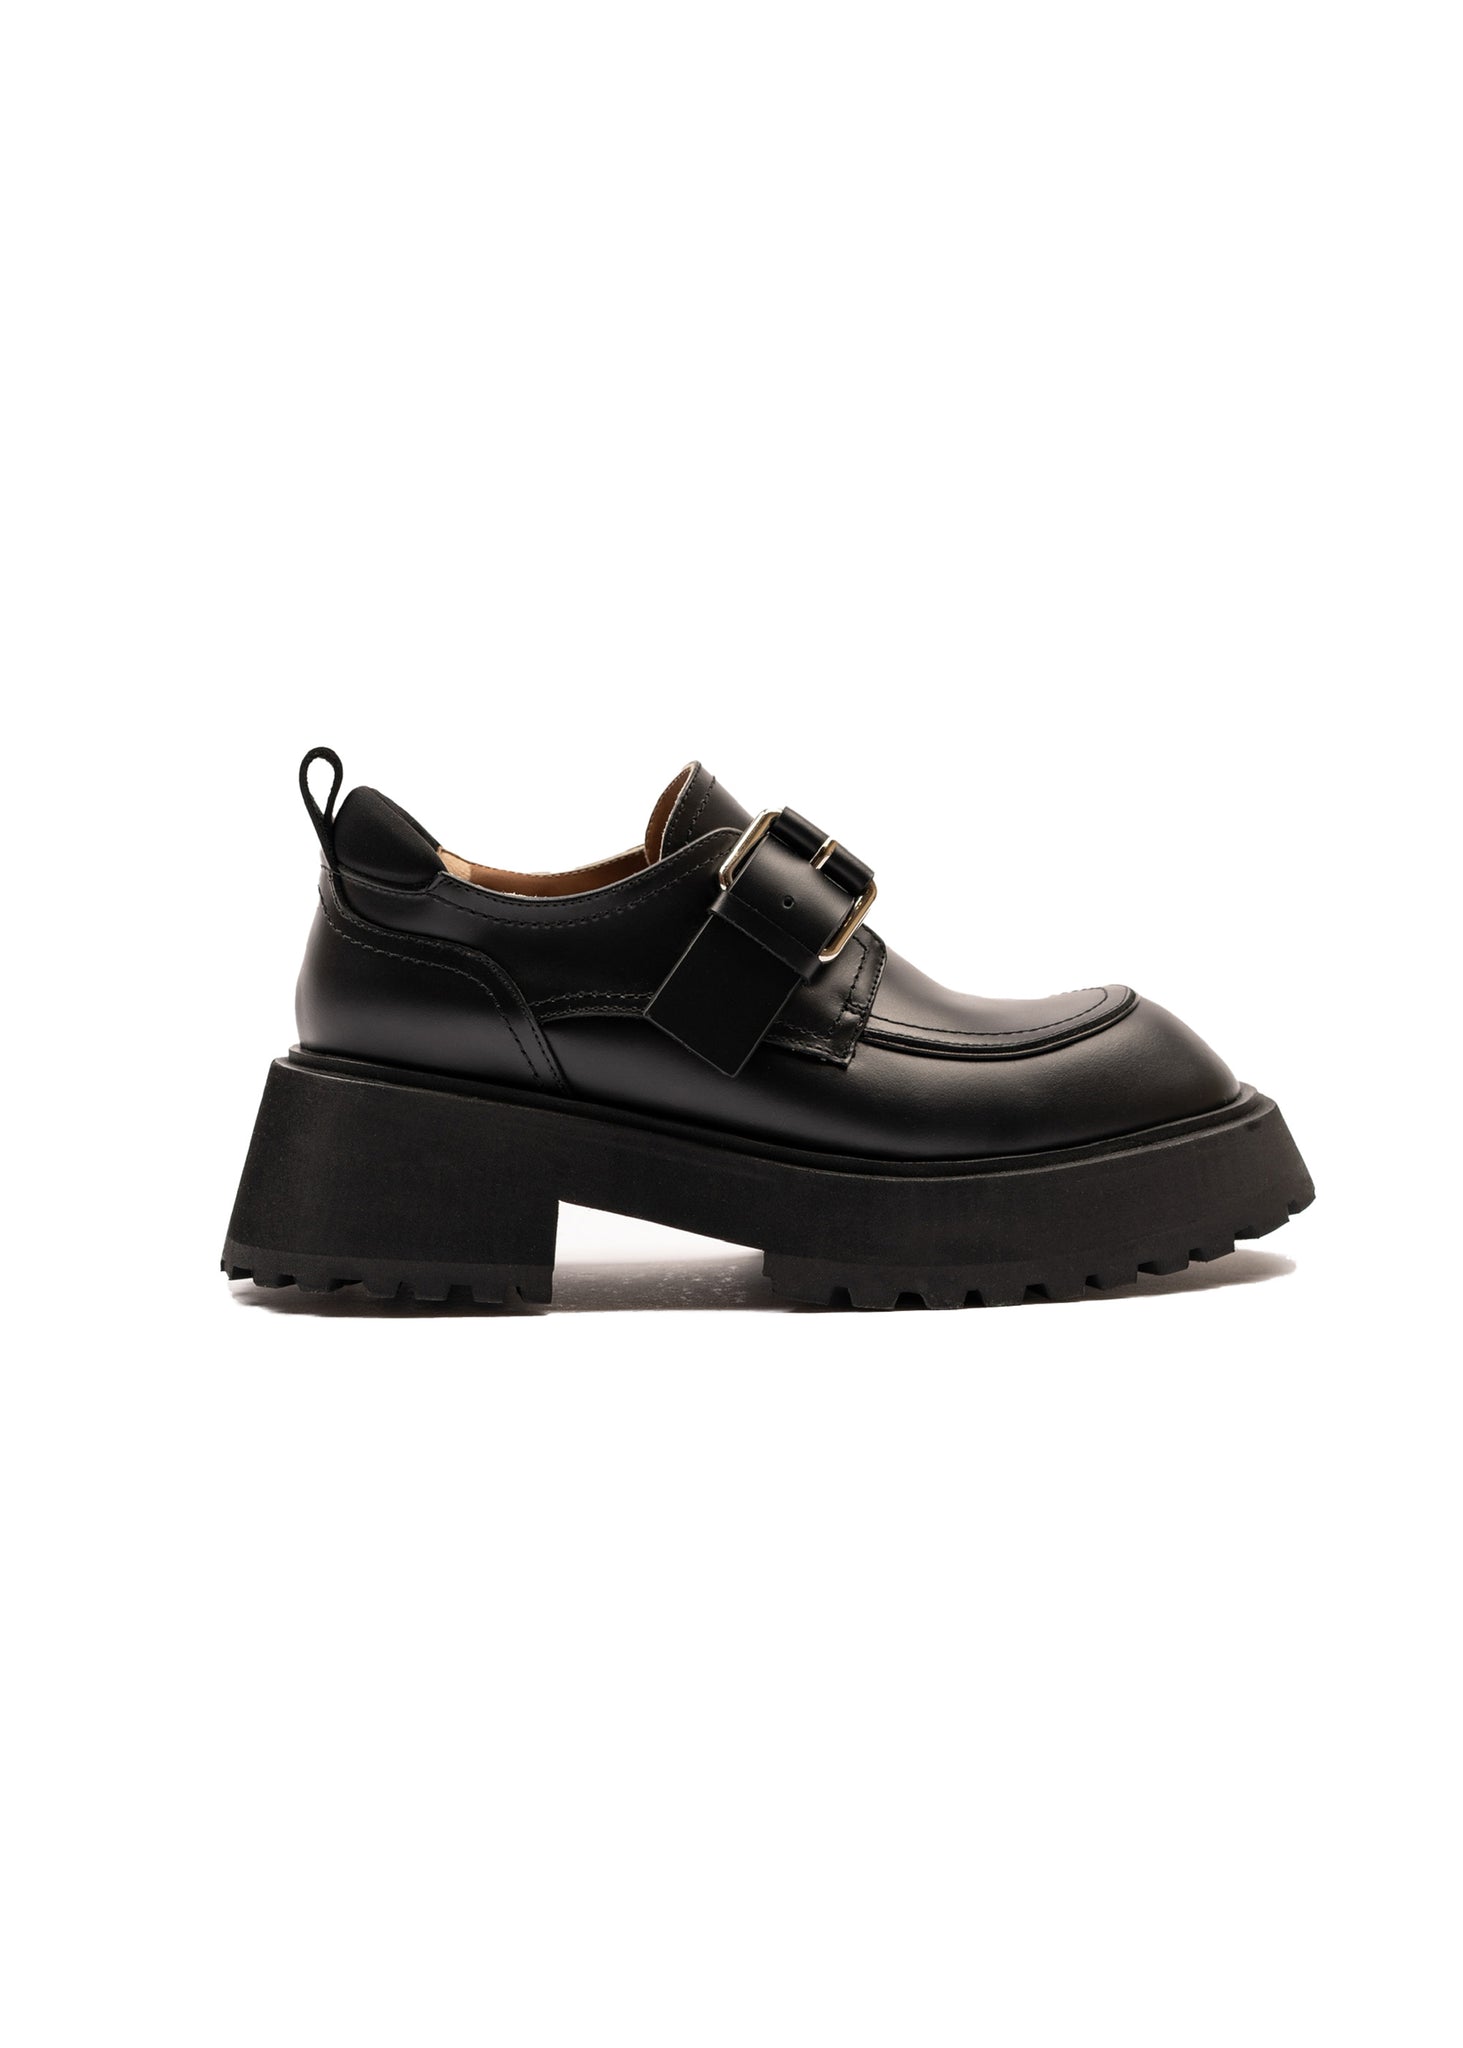 Black Buckle Loafers - 157Moments